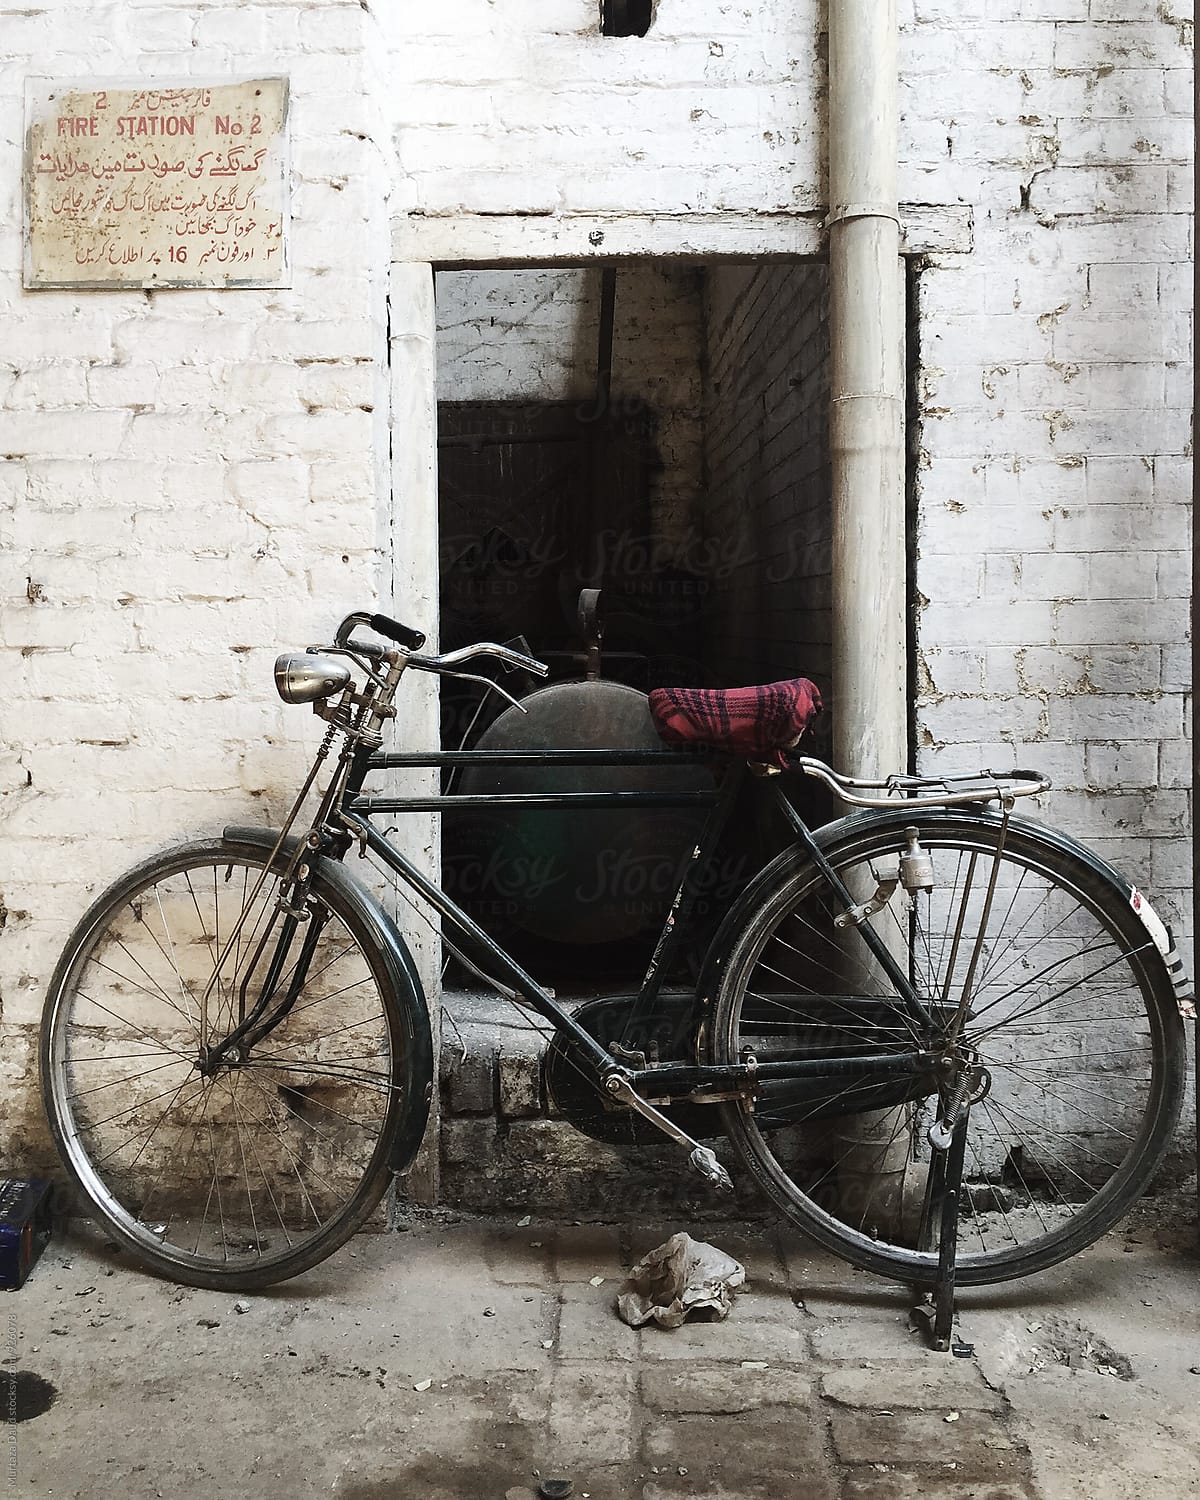 An old bicycle standing against a white wall in a rural area in Pakistan